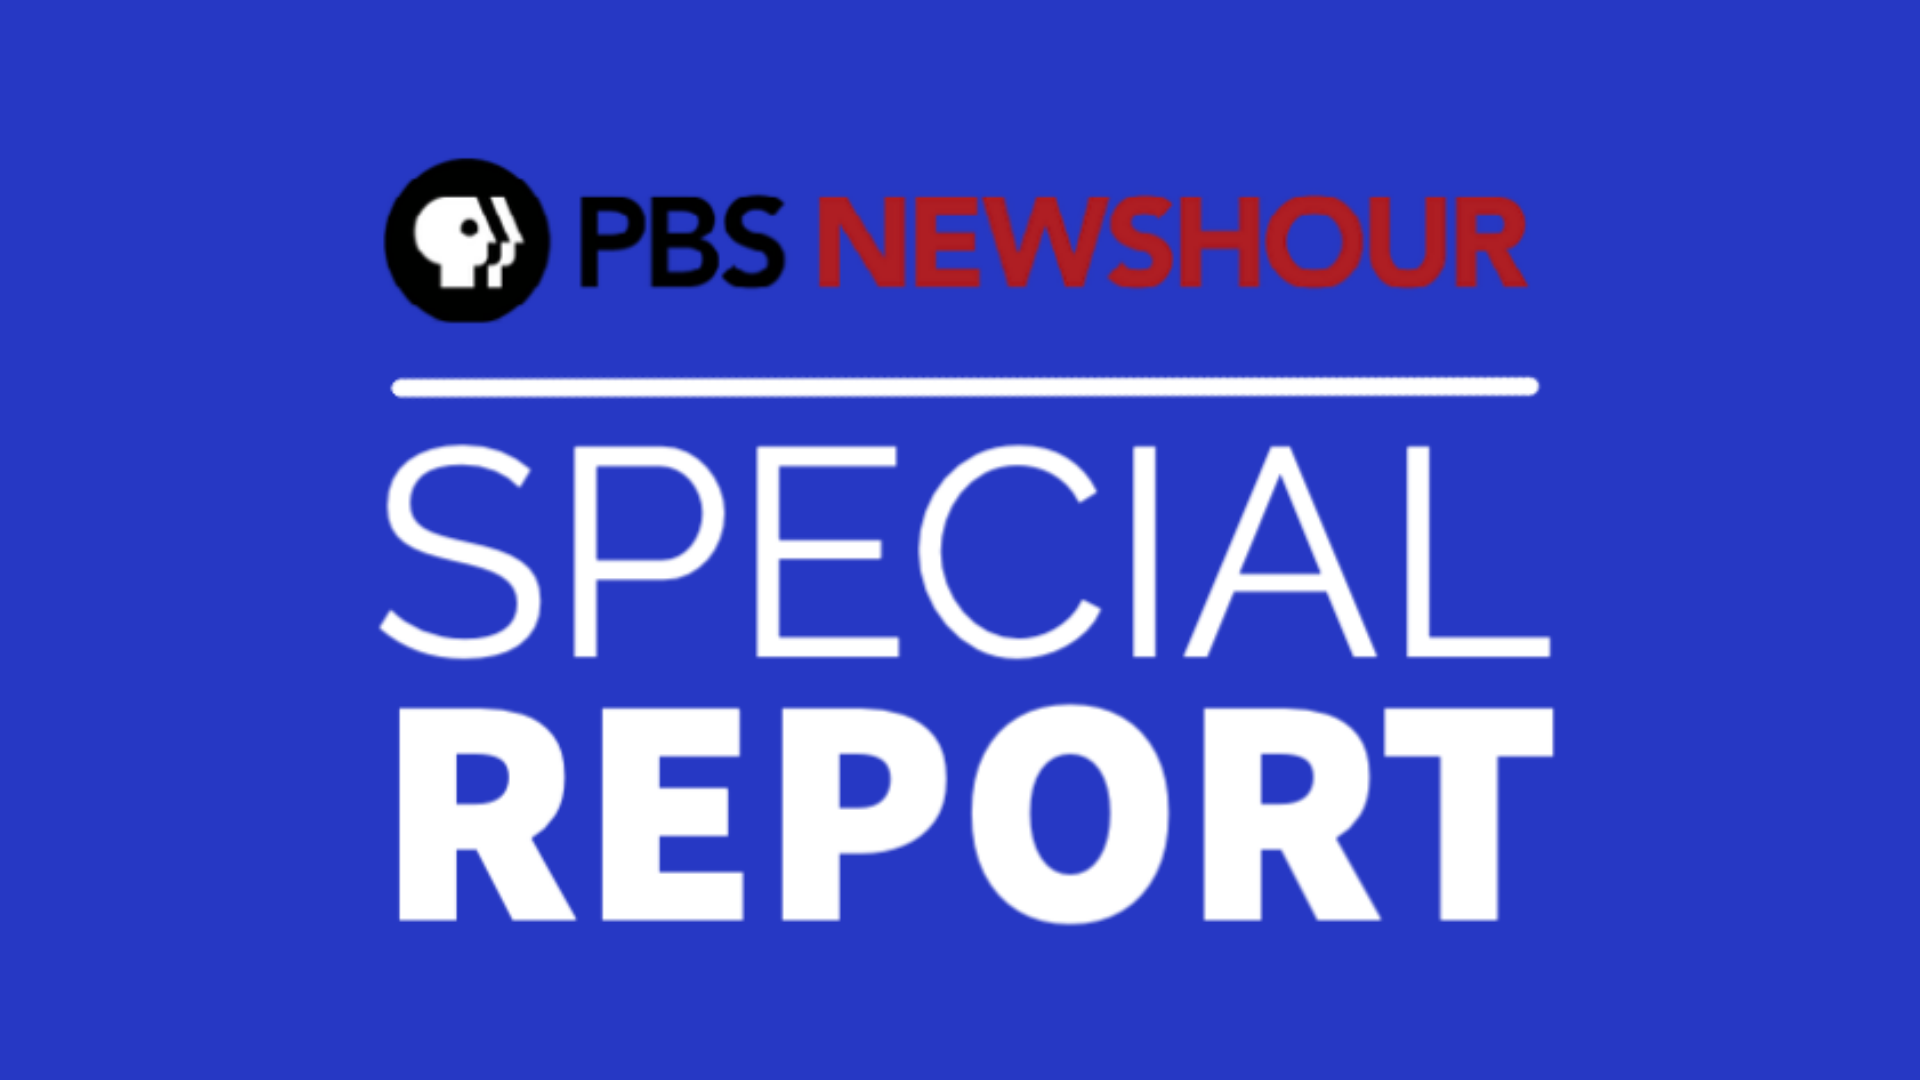 Presidential Inauguration <br/>PBS NewsHour Special Report